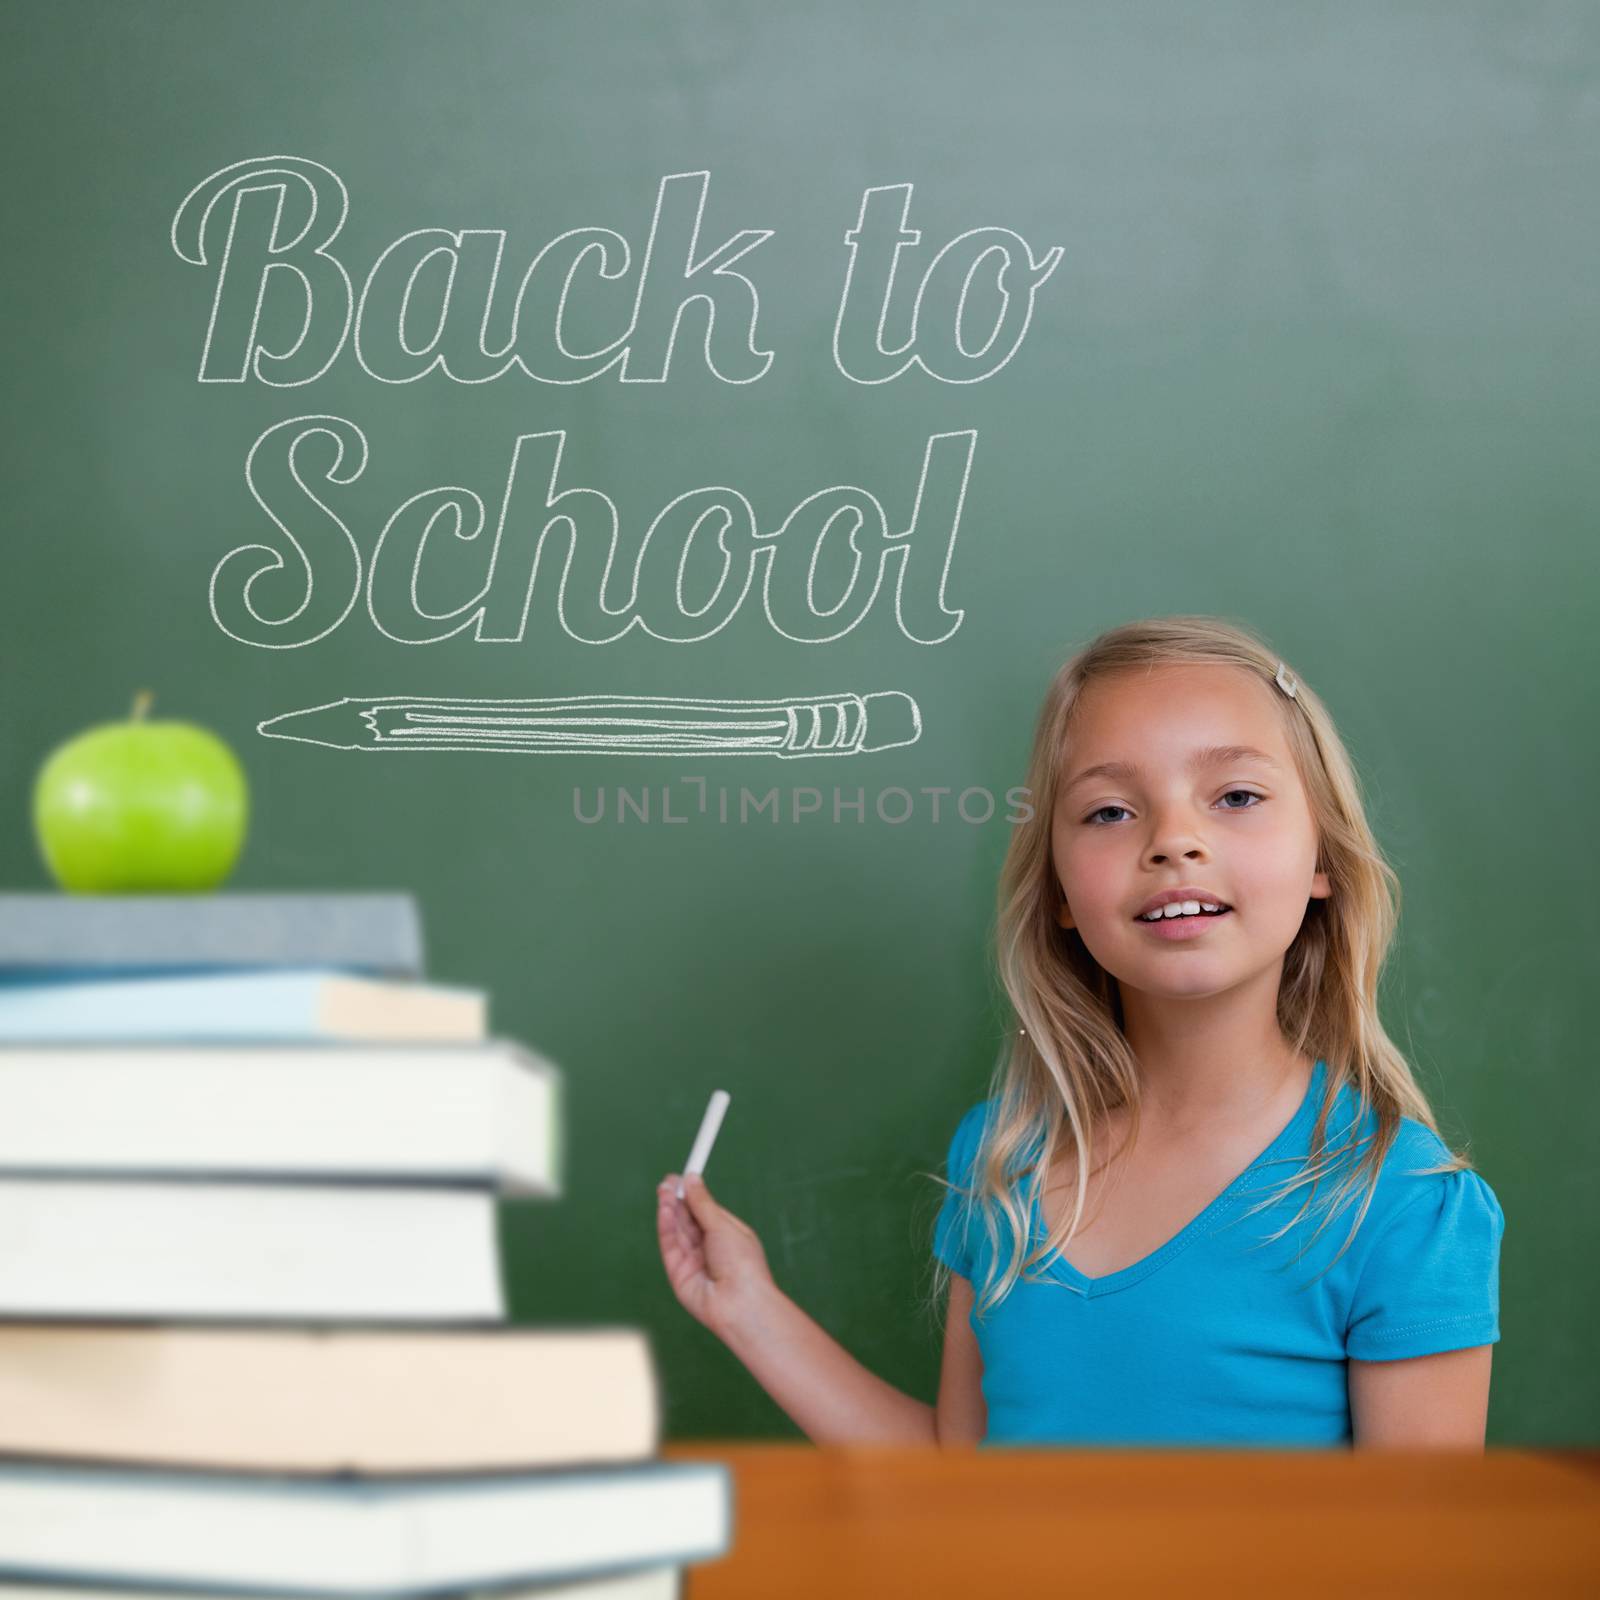 Composite image of back to school message by Wavebreakmedia